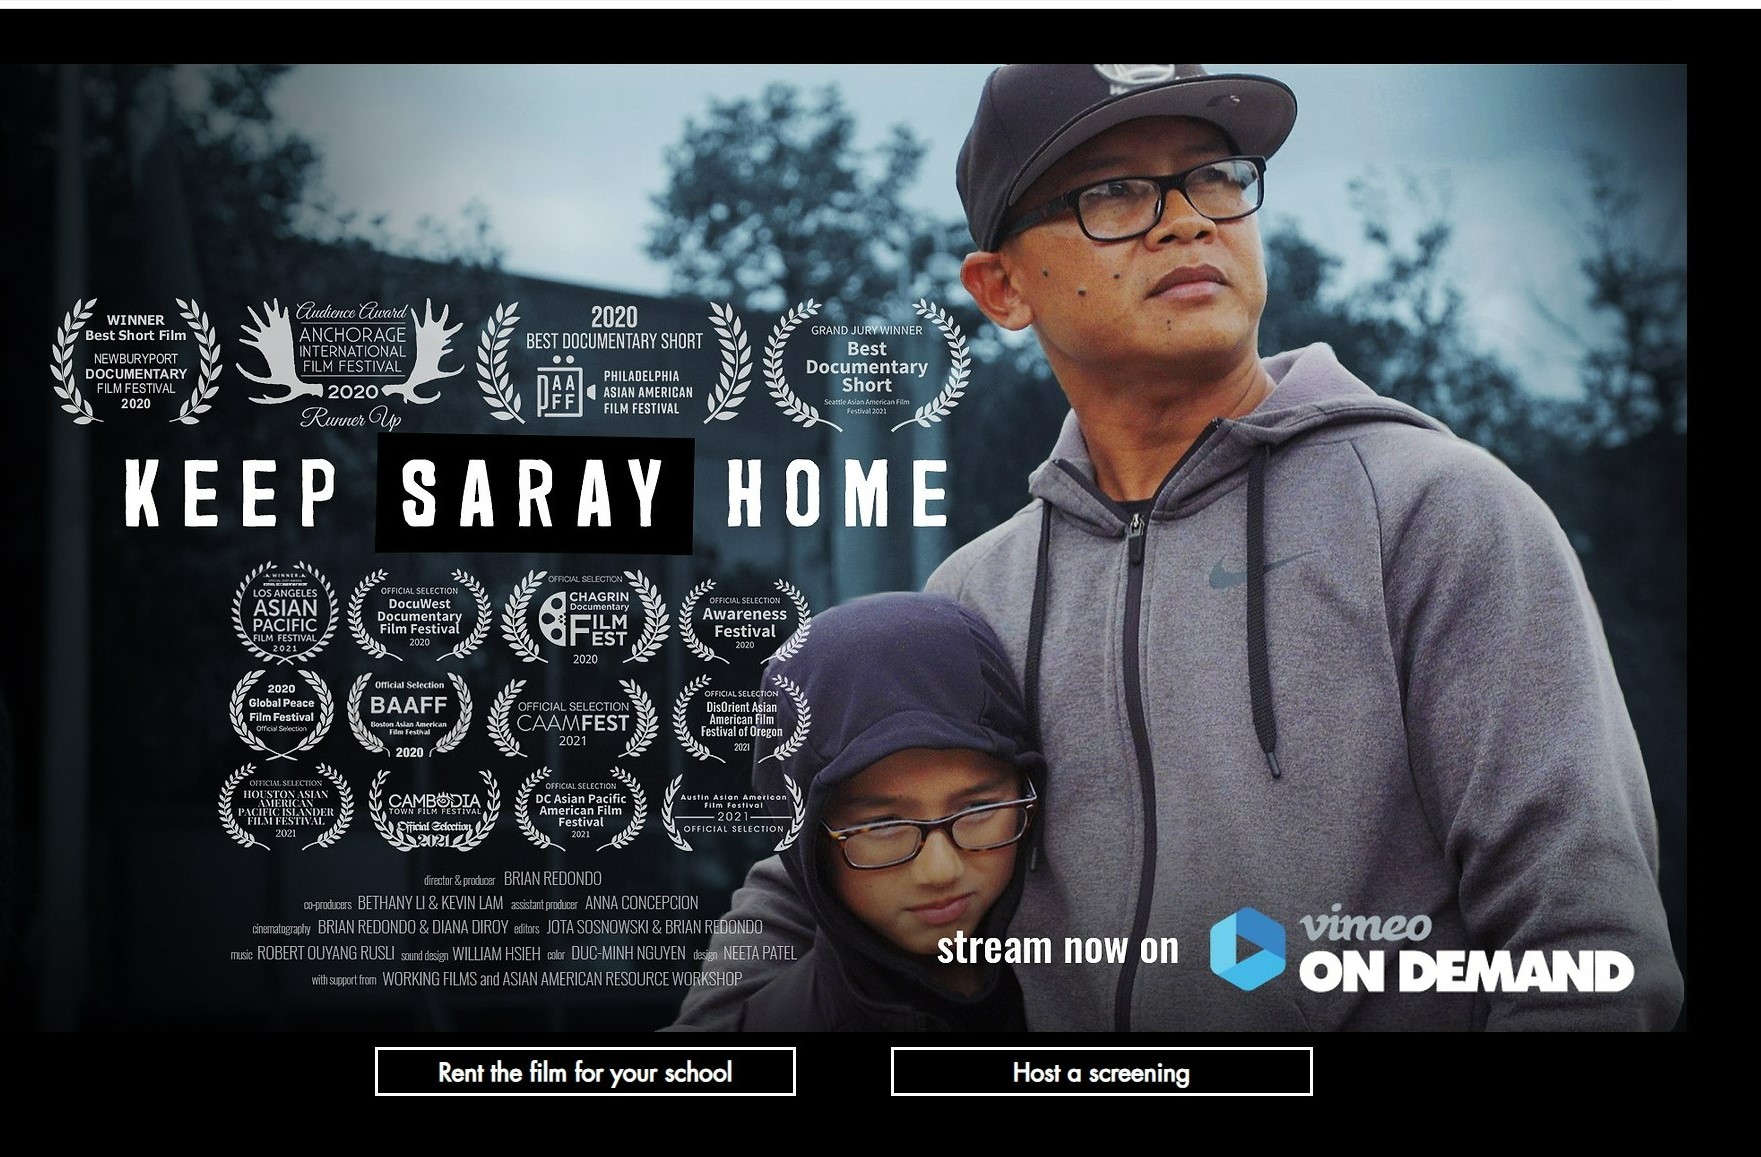 Title Page for the film Keep Saray Home, shows list of film festivals and awards for the film. On the right, a man wearing a hat and glasses has his arm around a child wearing a sweatshirt